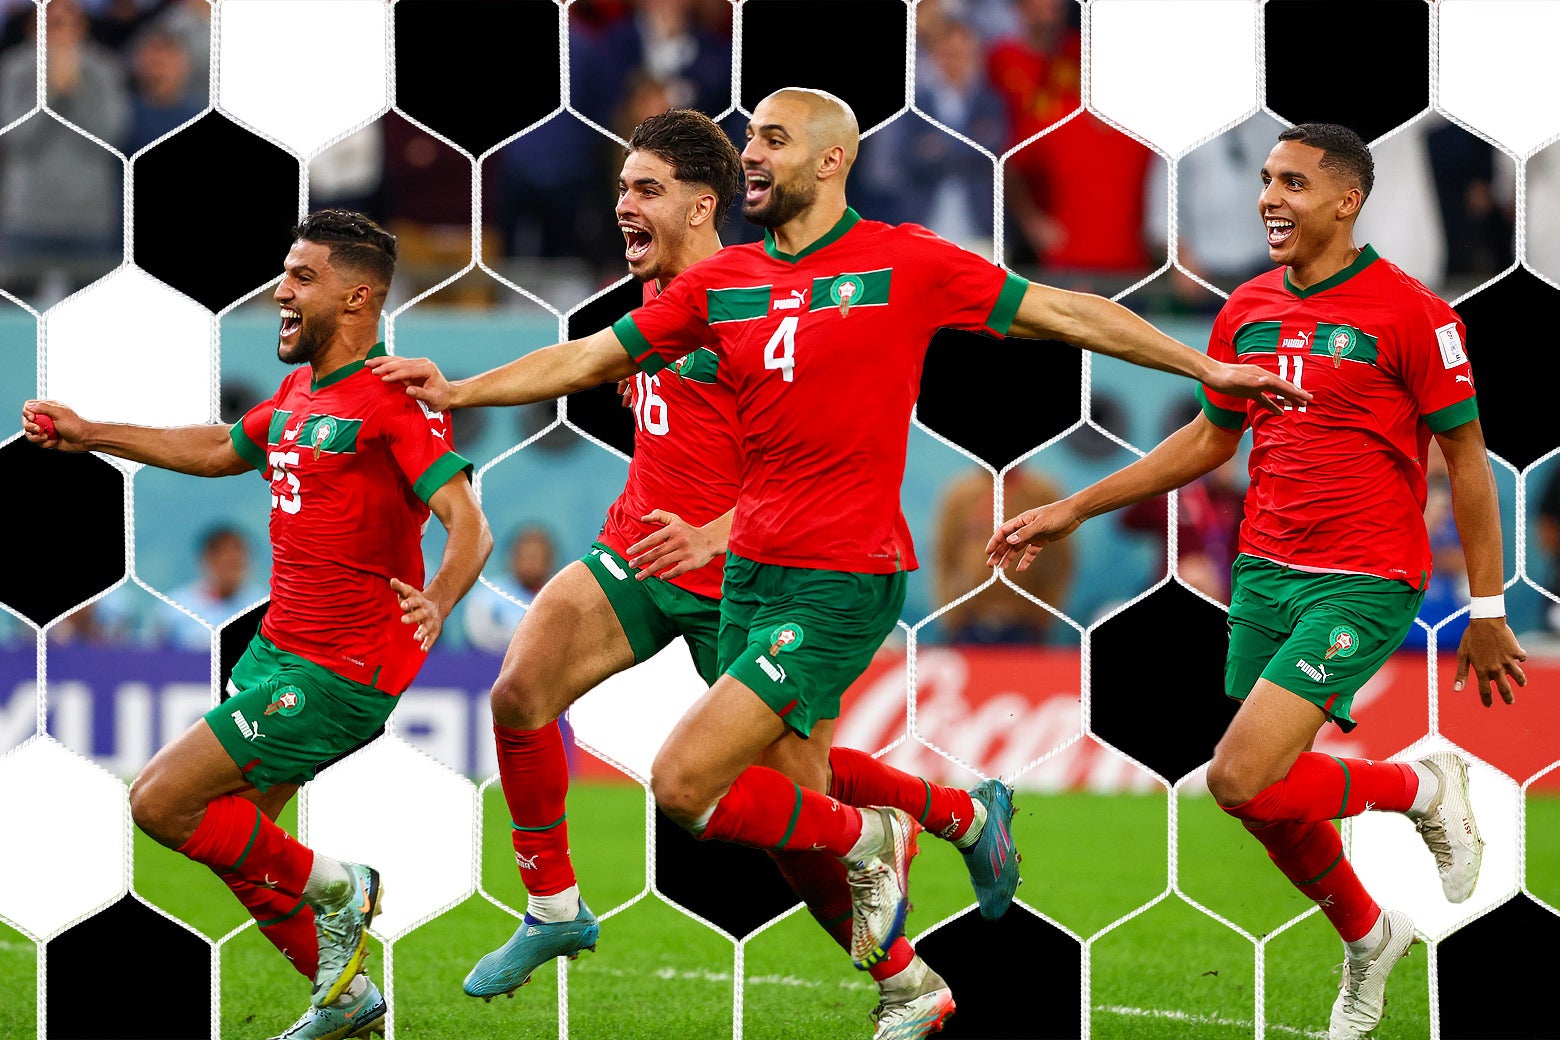 Four Moroccan players run and smile on the field after the game